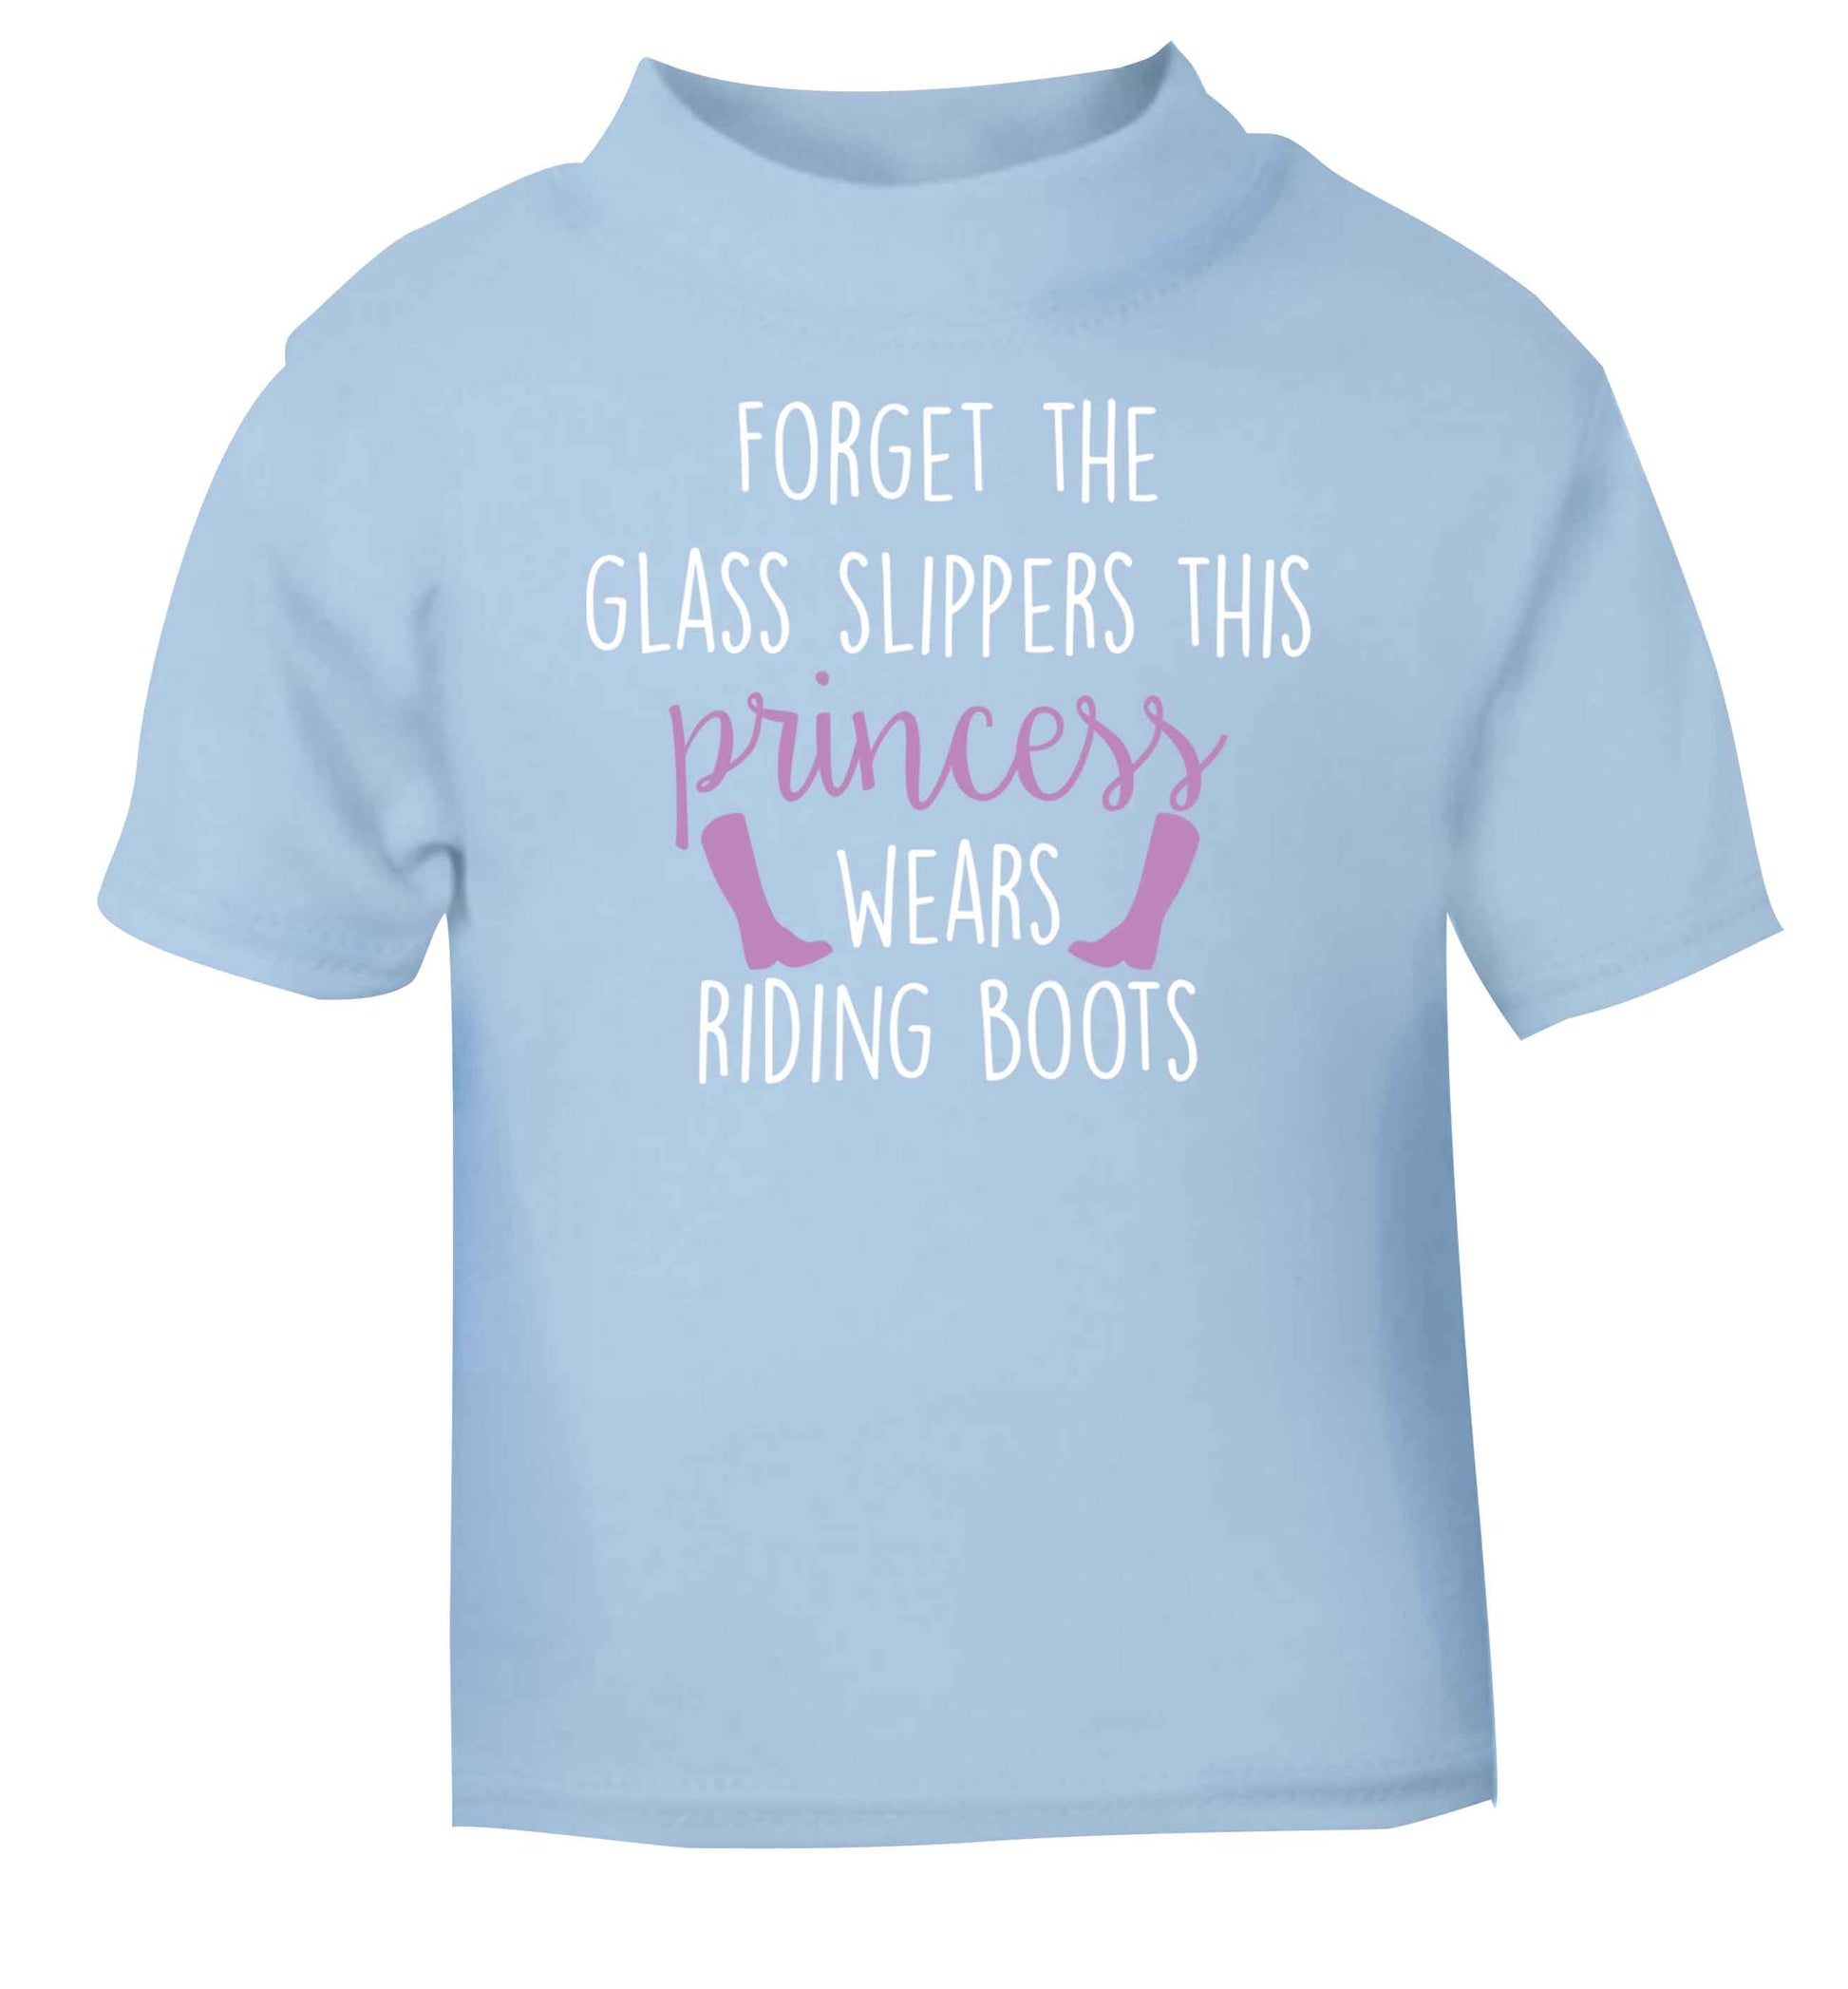 Forget the glass slippers this princess wears riding boots light blue baby toddler Tshirt 2 Years